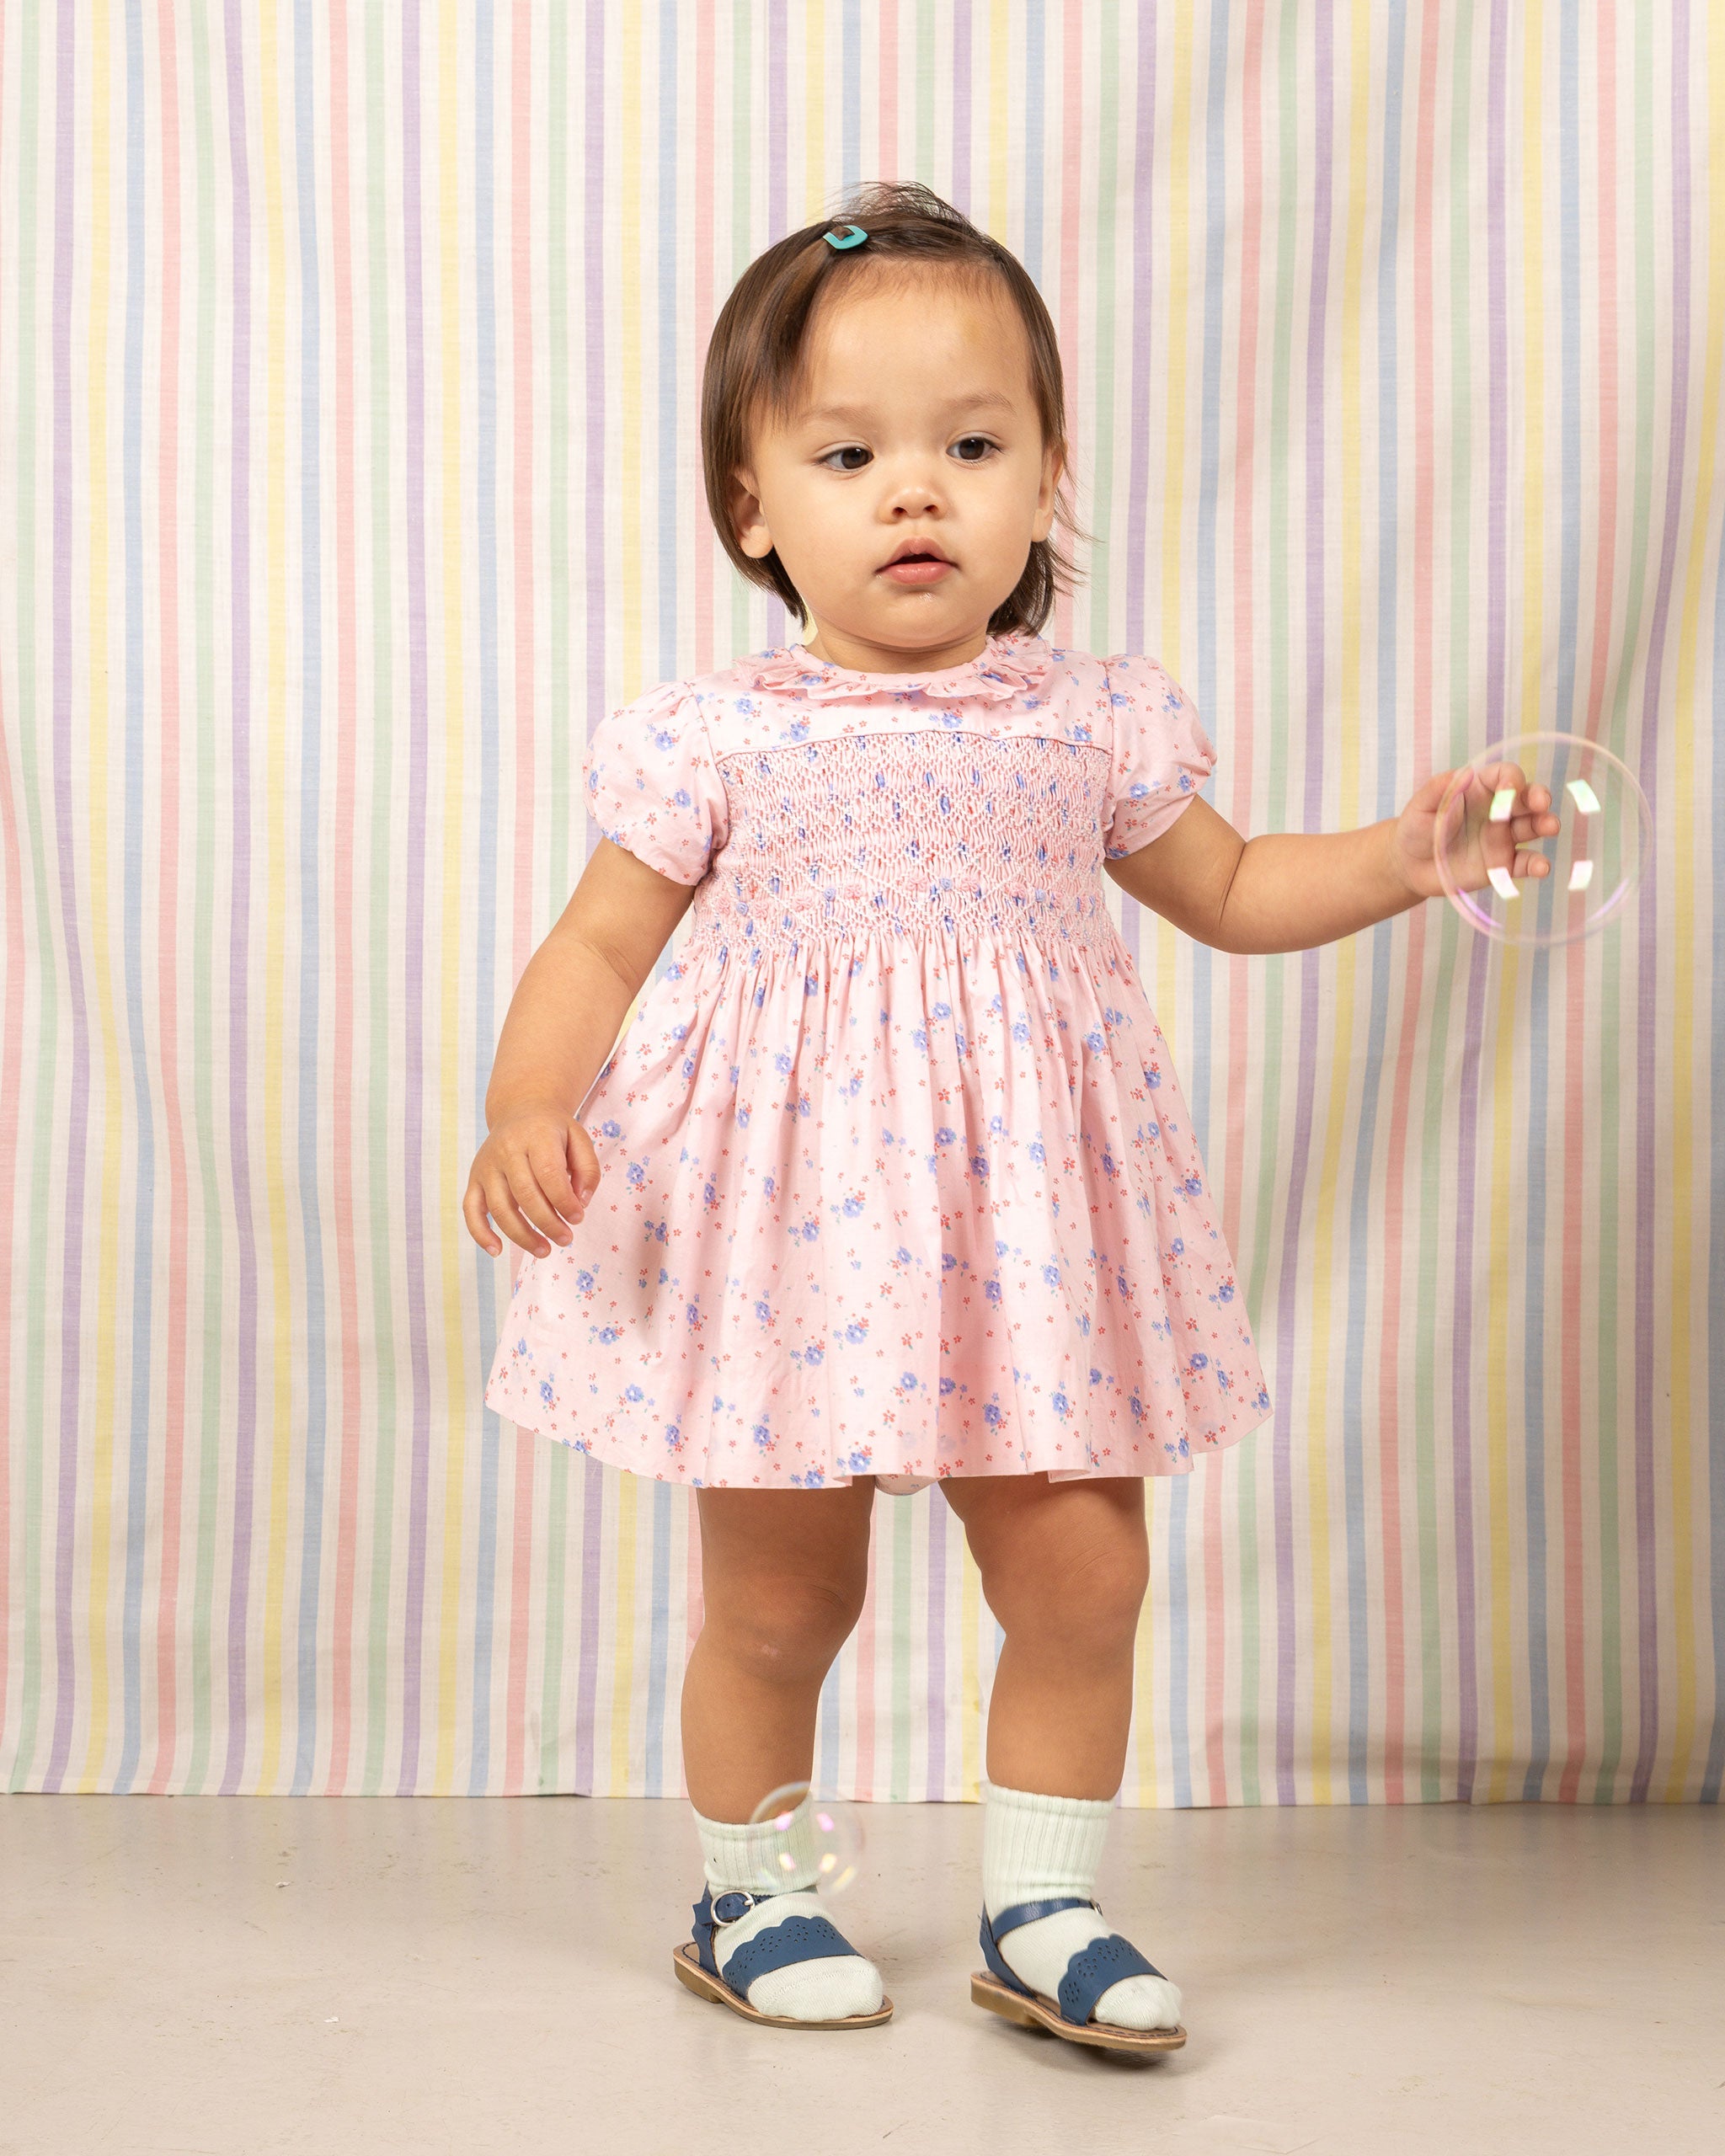 baby in pink smock dress